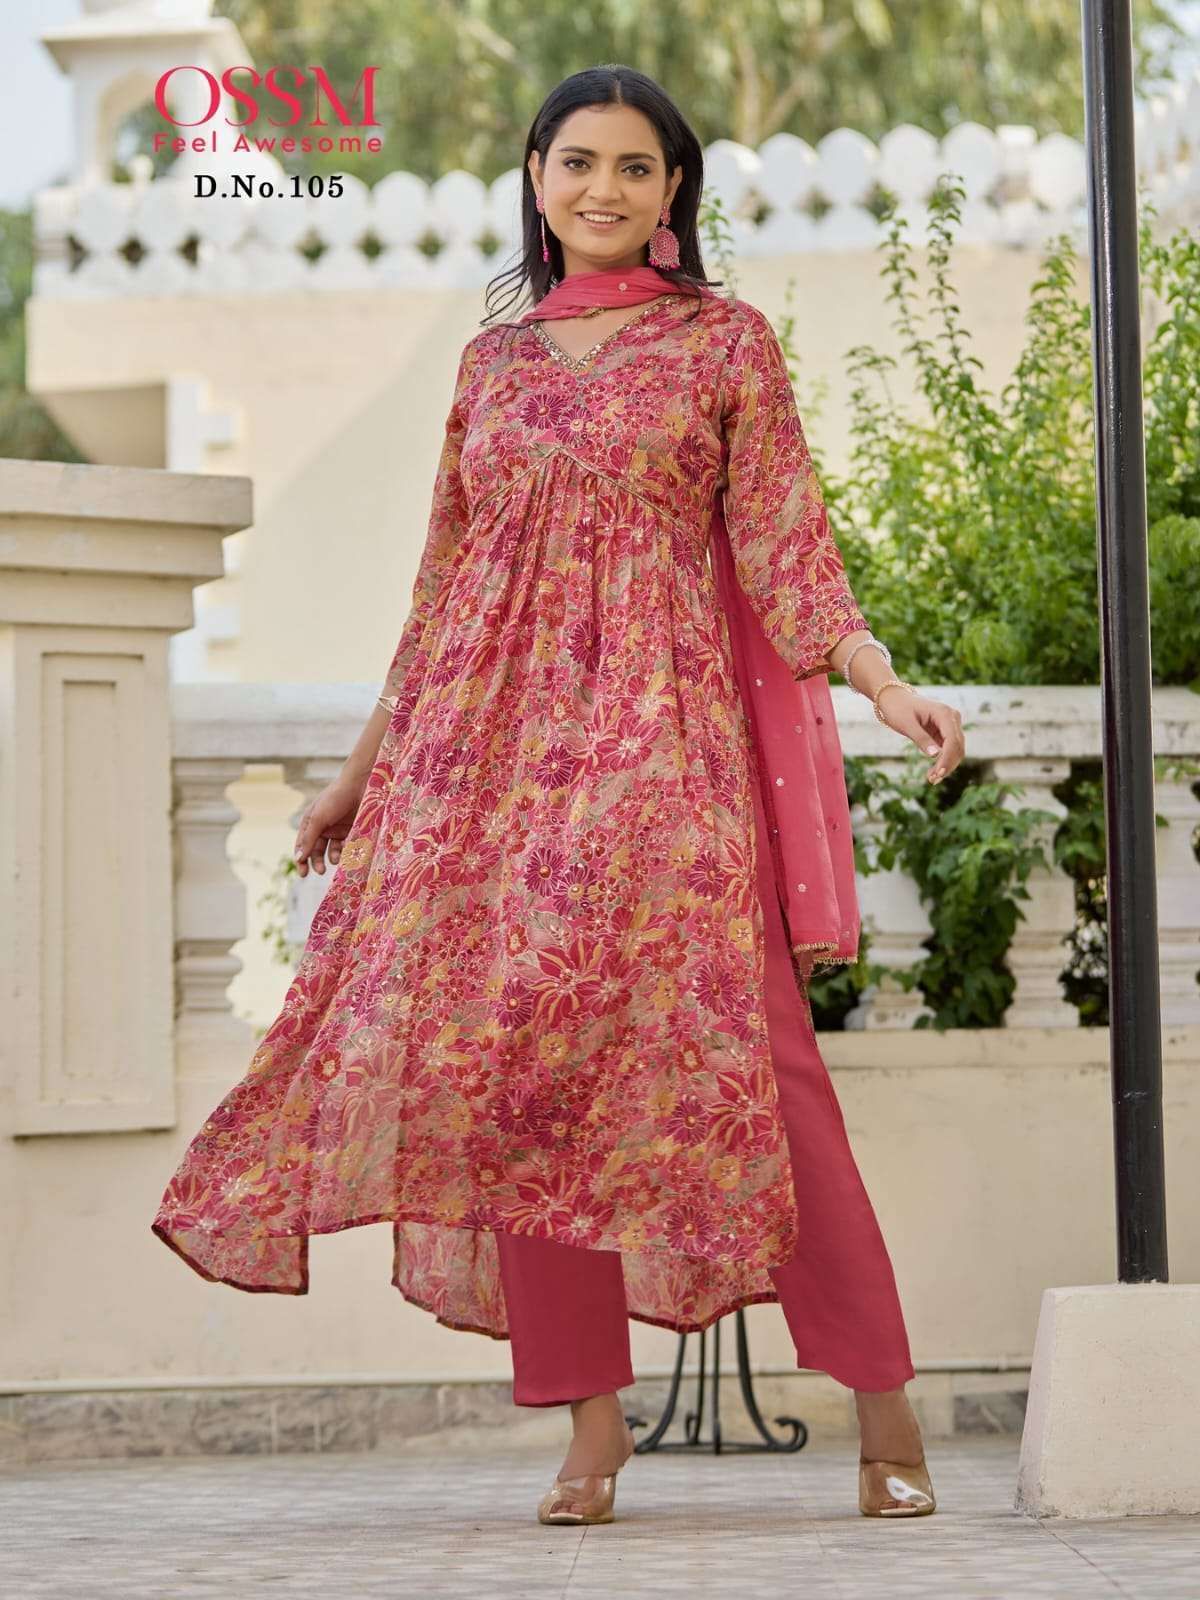 S4U 12-69 Fancy Kurti Branded Outfit Collection New Designs